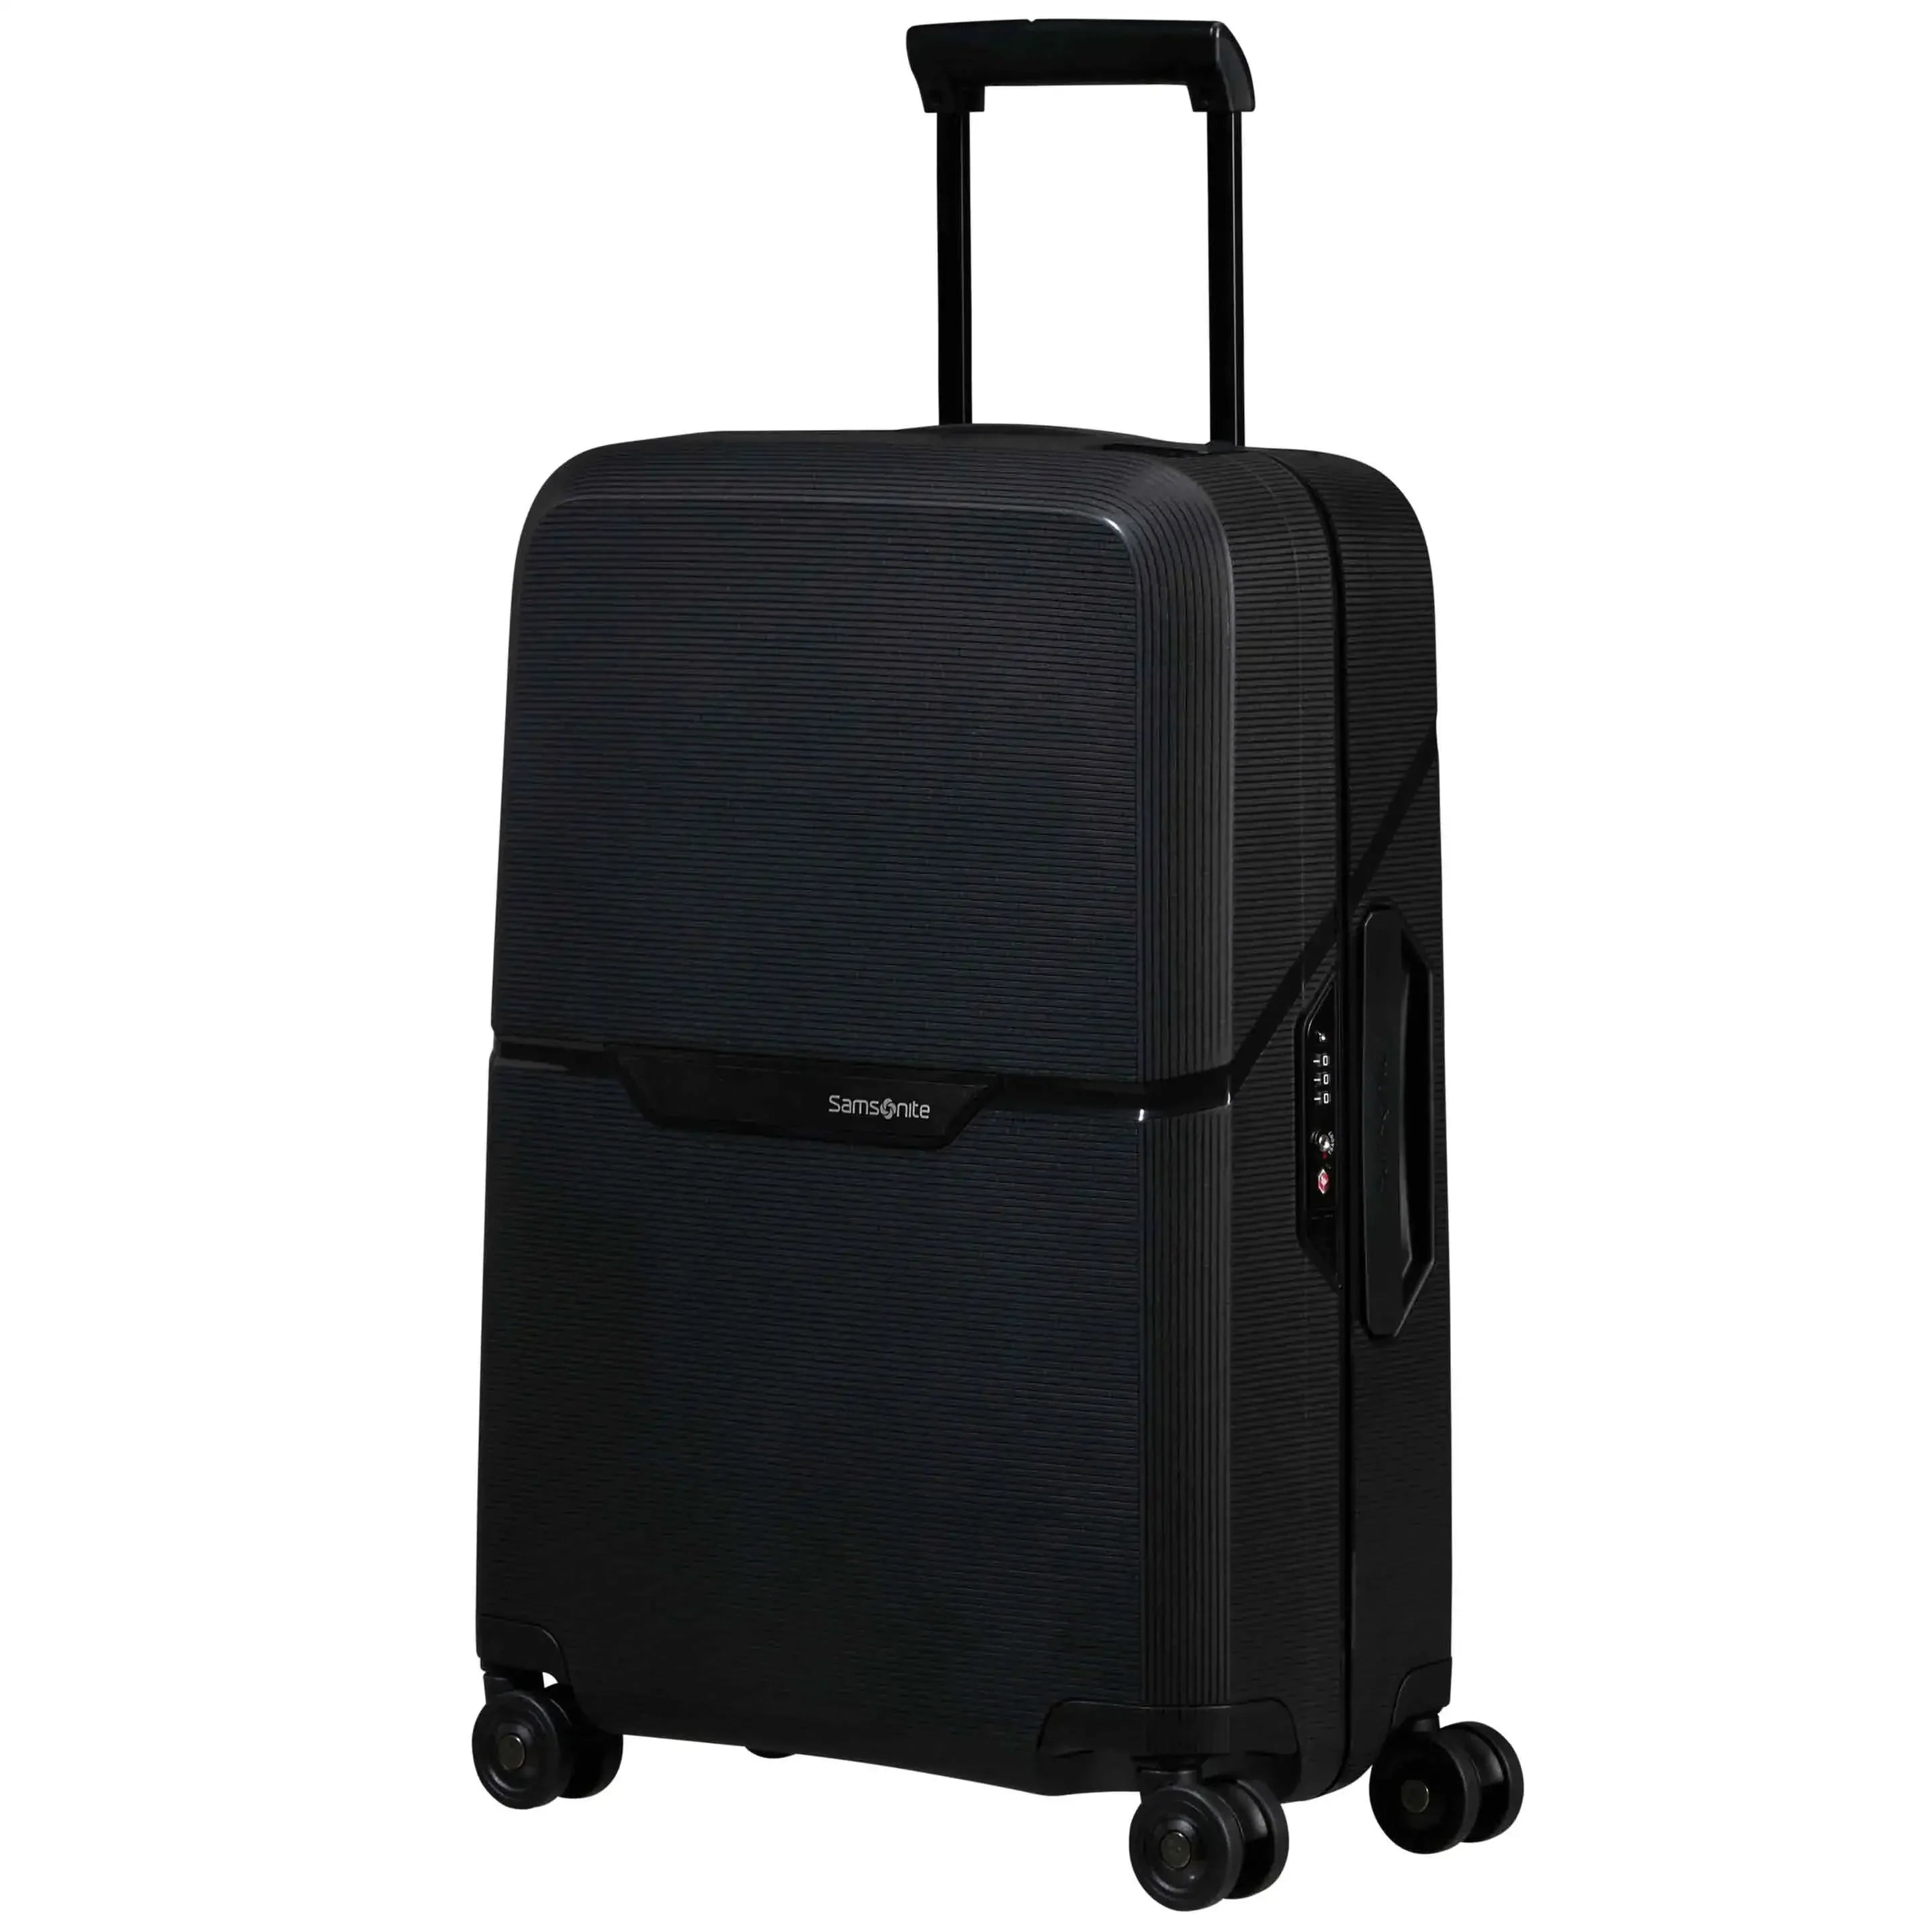 The right luggage from Samsonite